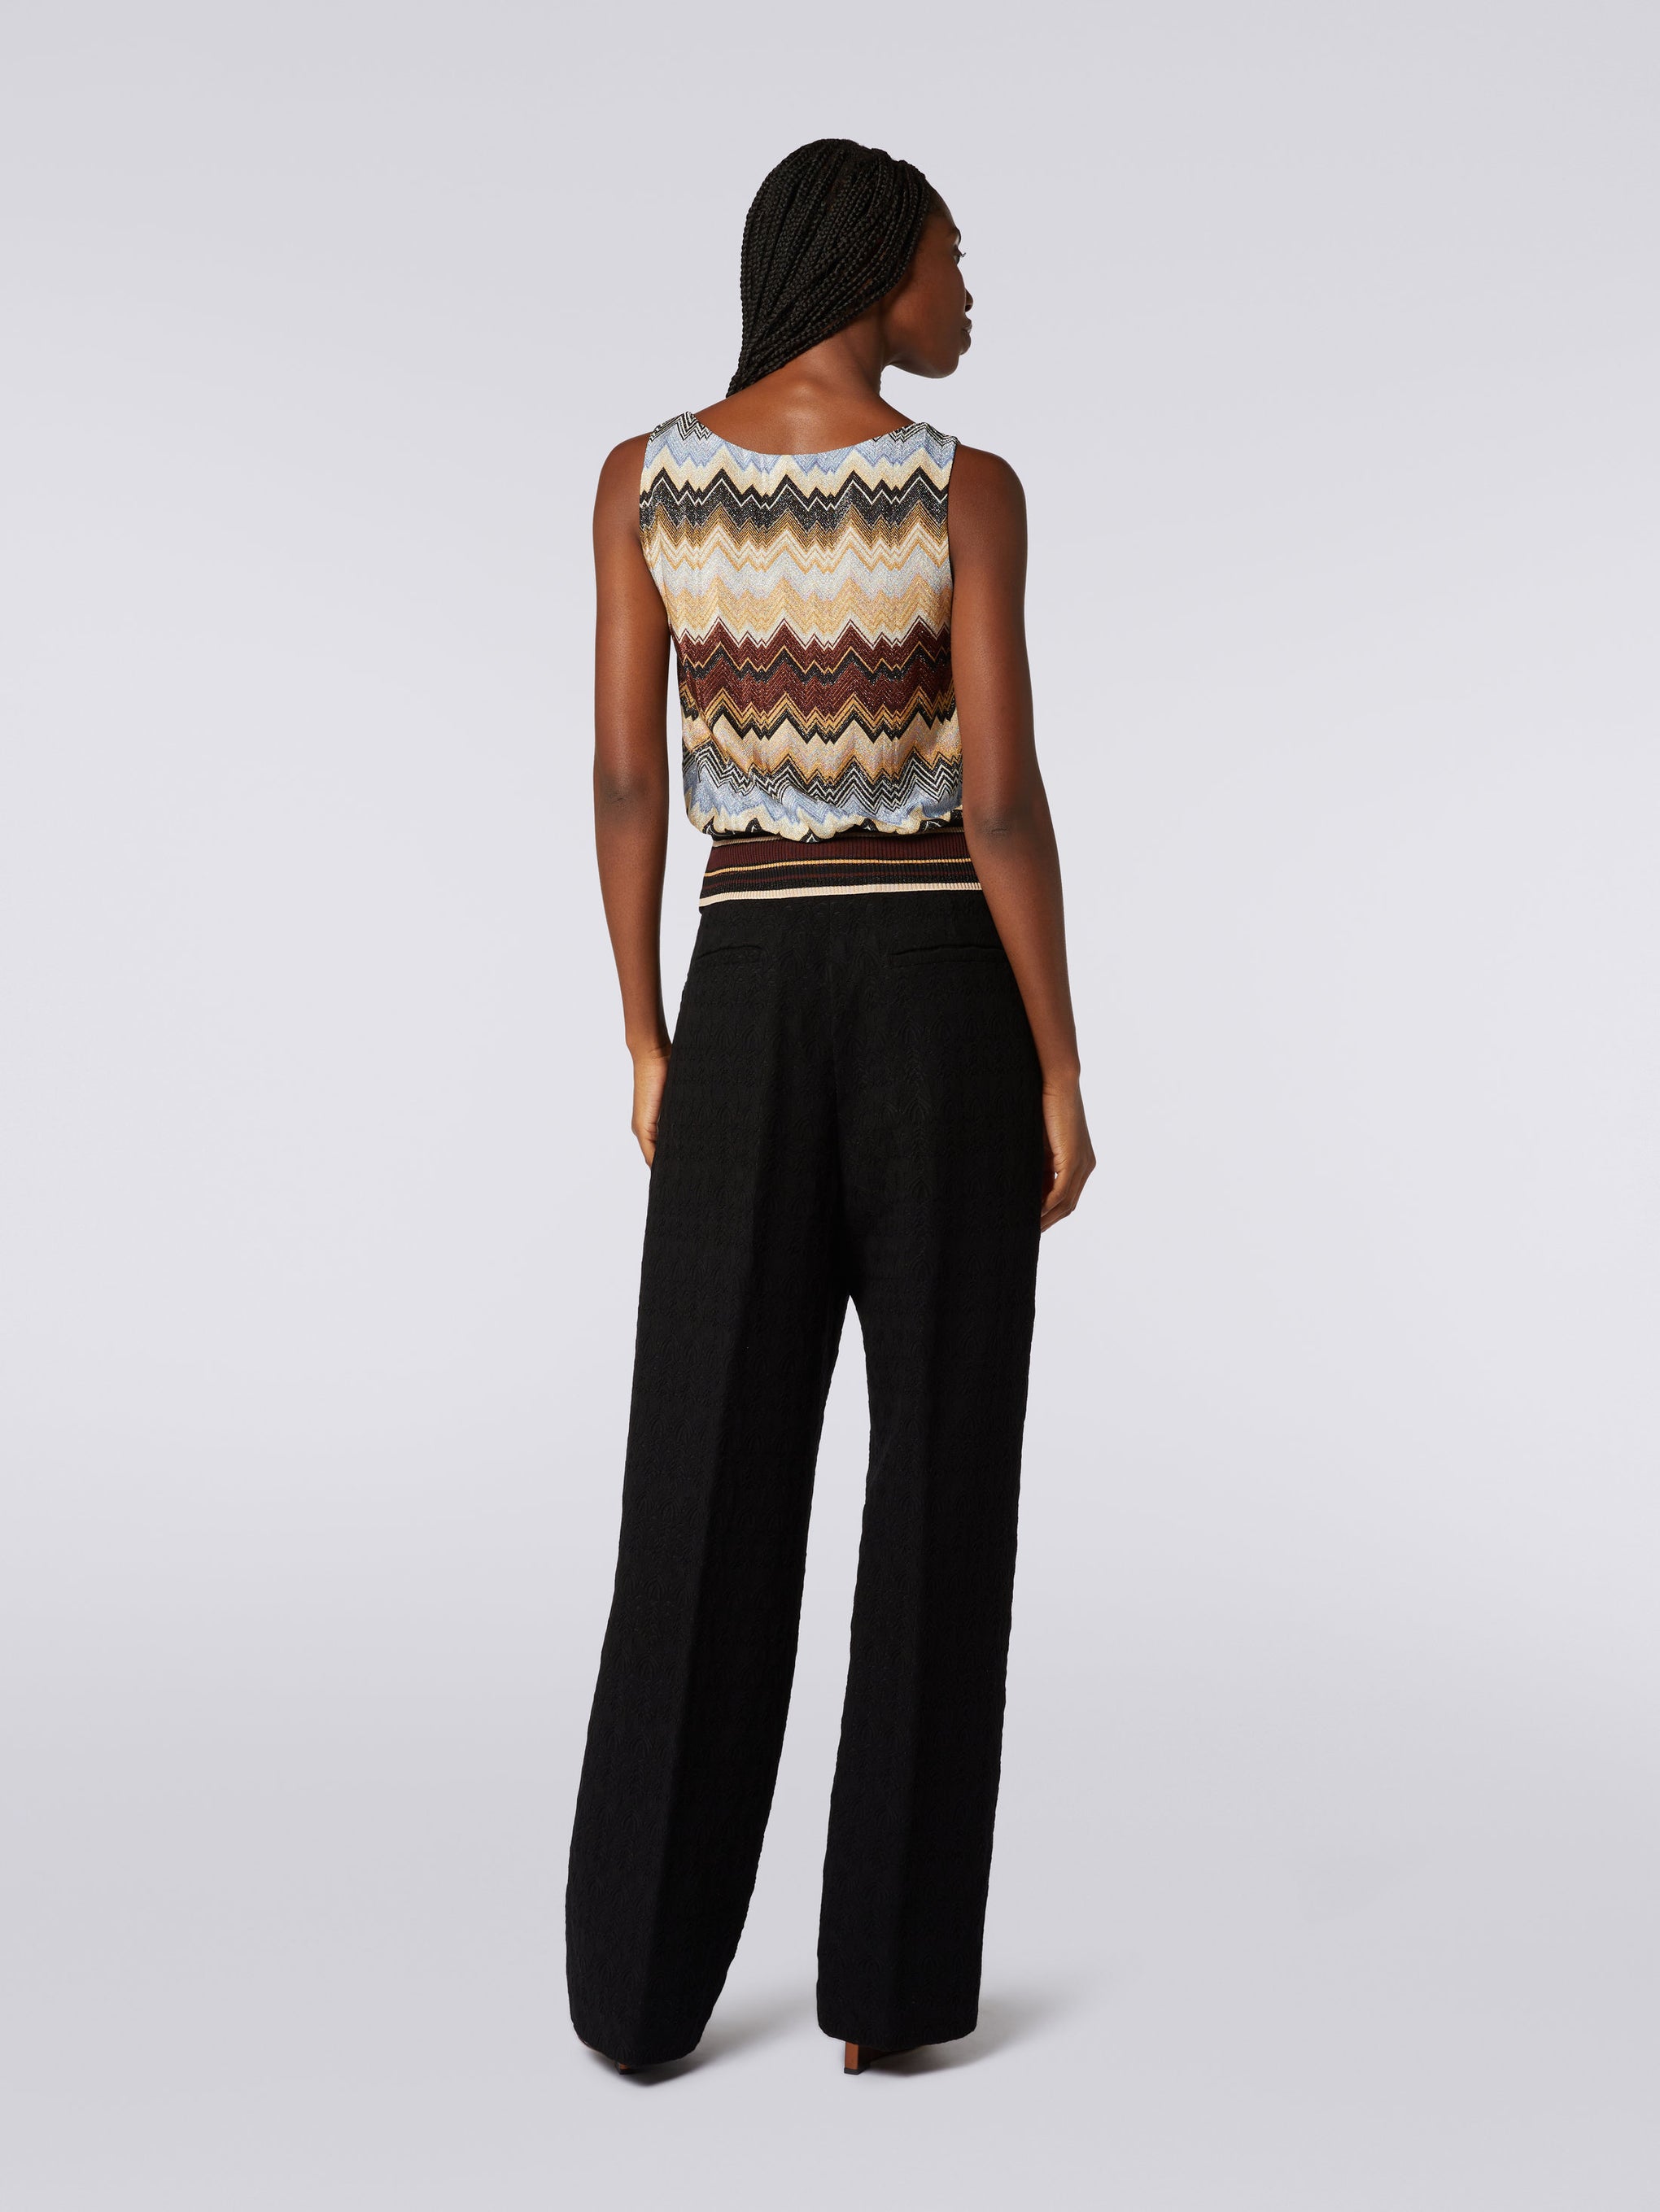 Missoni Top in Irregular Brown Multicolour available at The New Trend Australia.